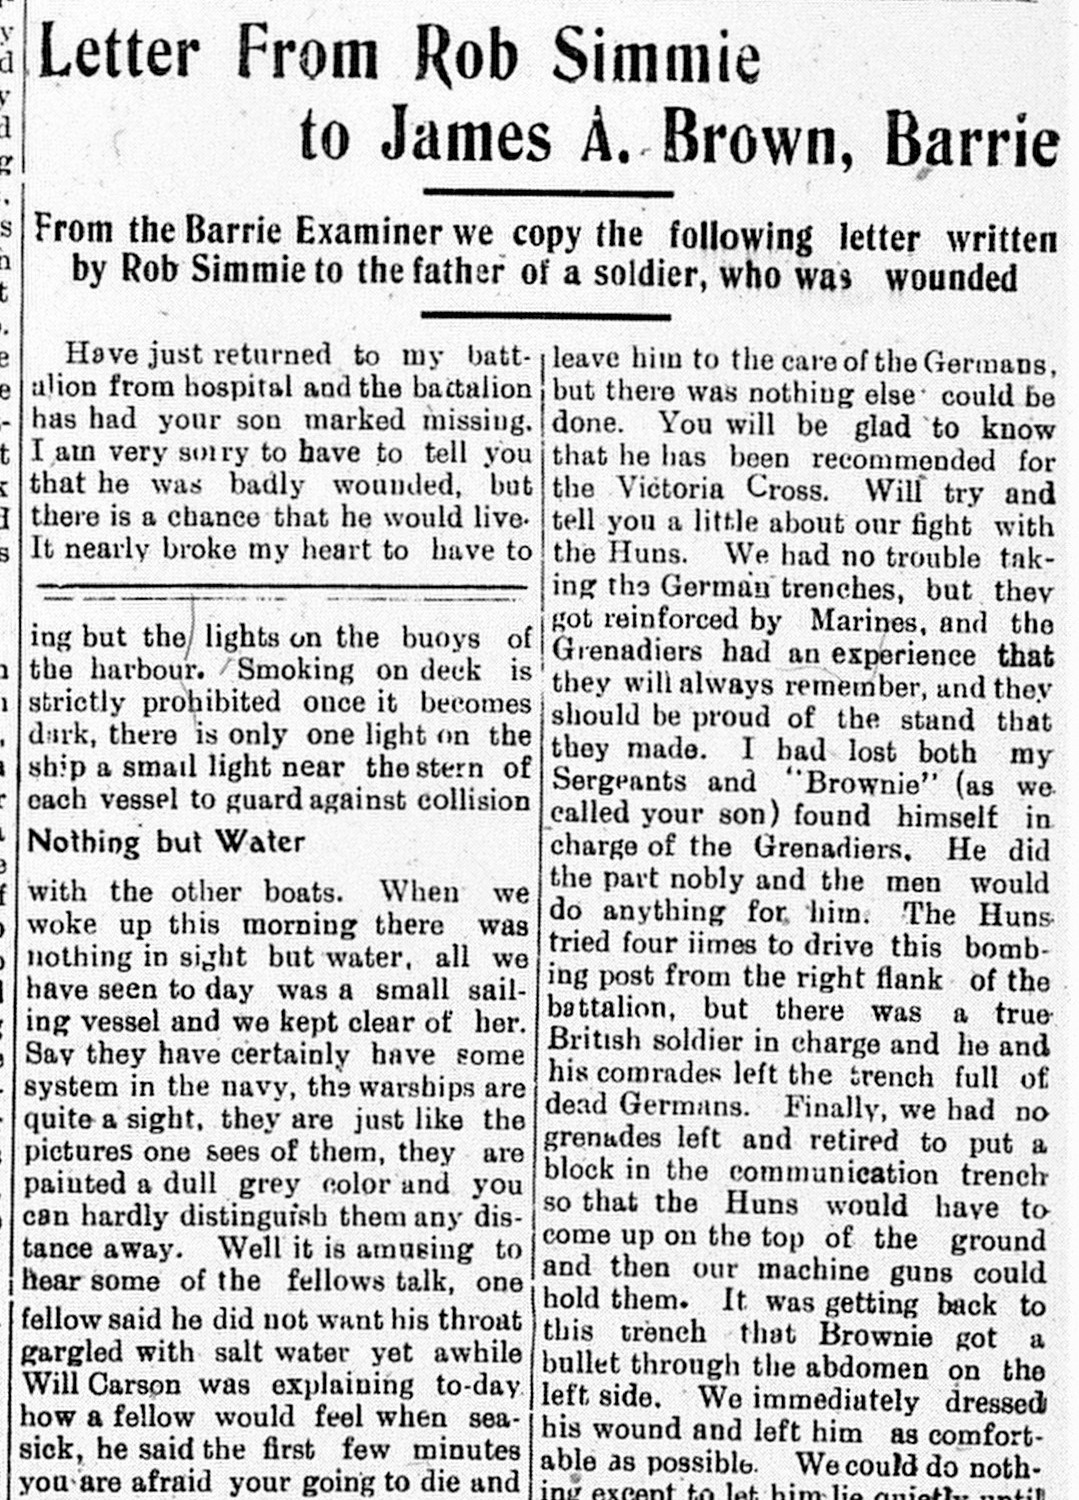 Canadian Echo, December 20, 1916, p.1, part 1 of 2